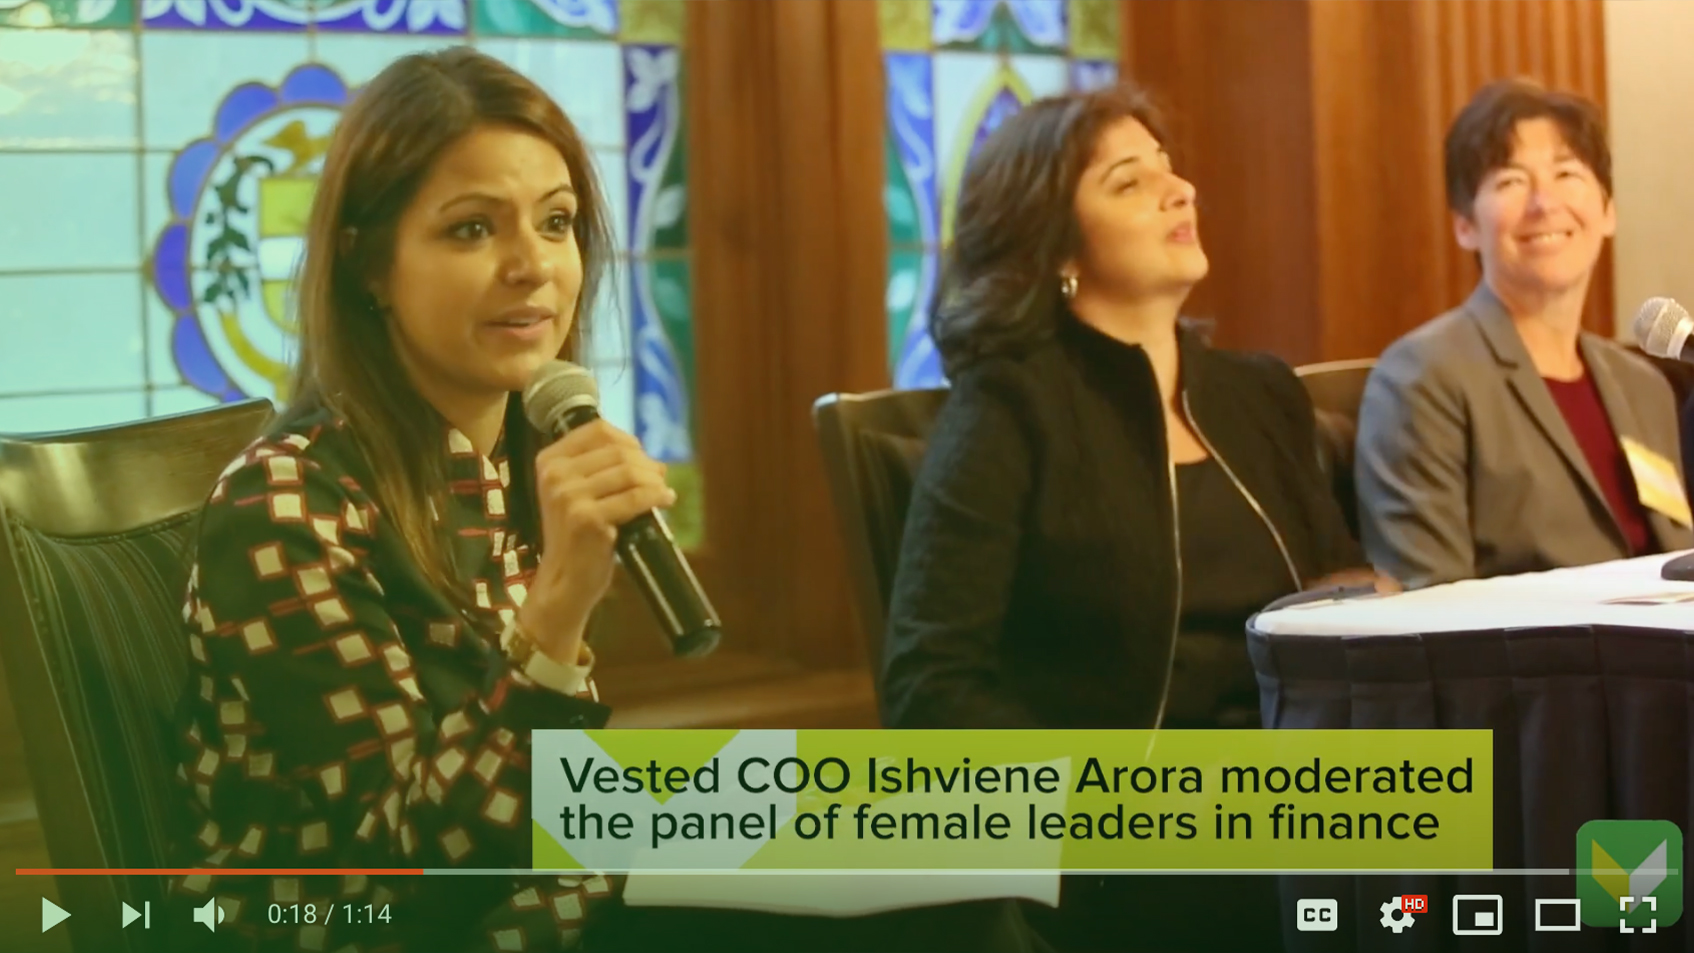 Vested COO moderating a panel of female leaders in finance.